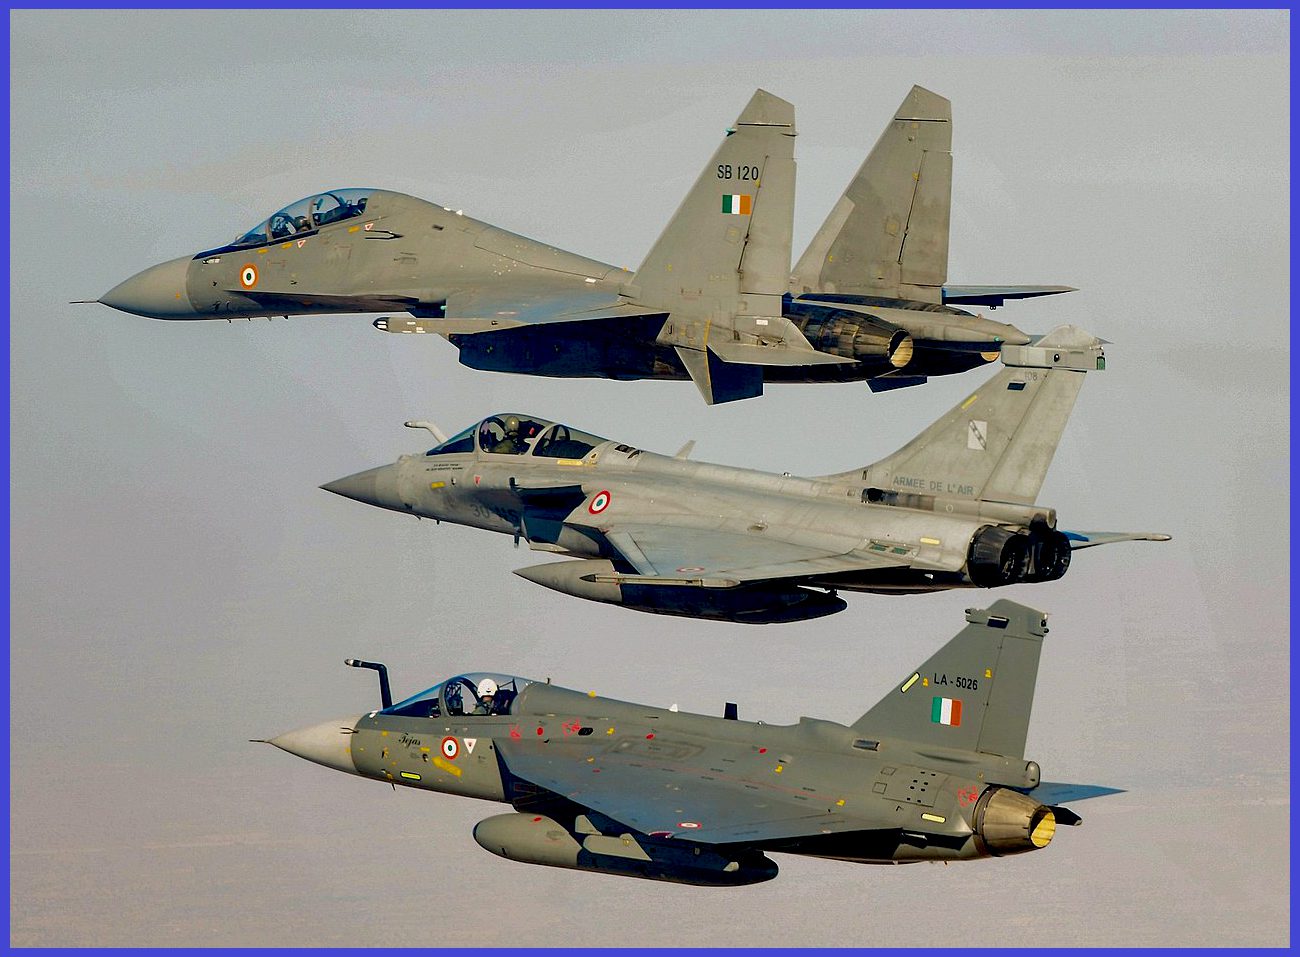 Photo Credit: Indian Air Force 